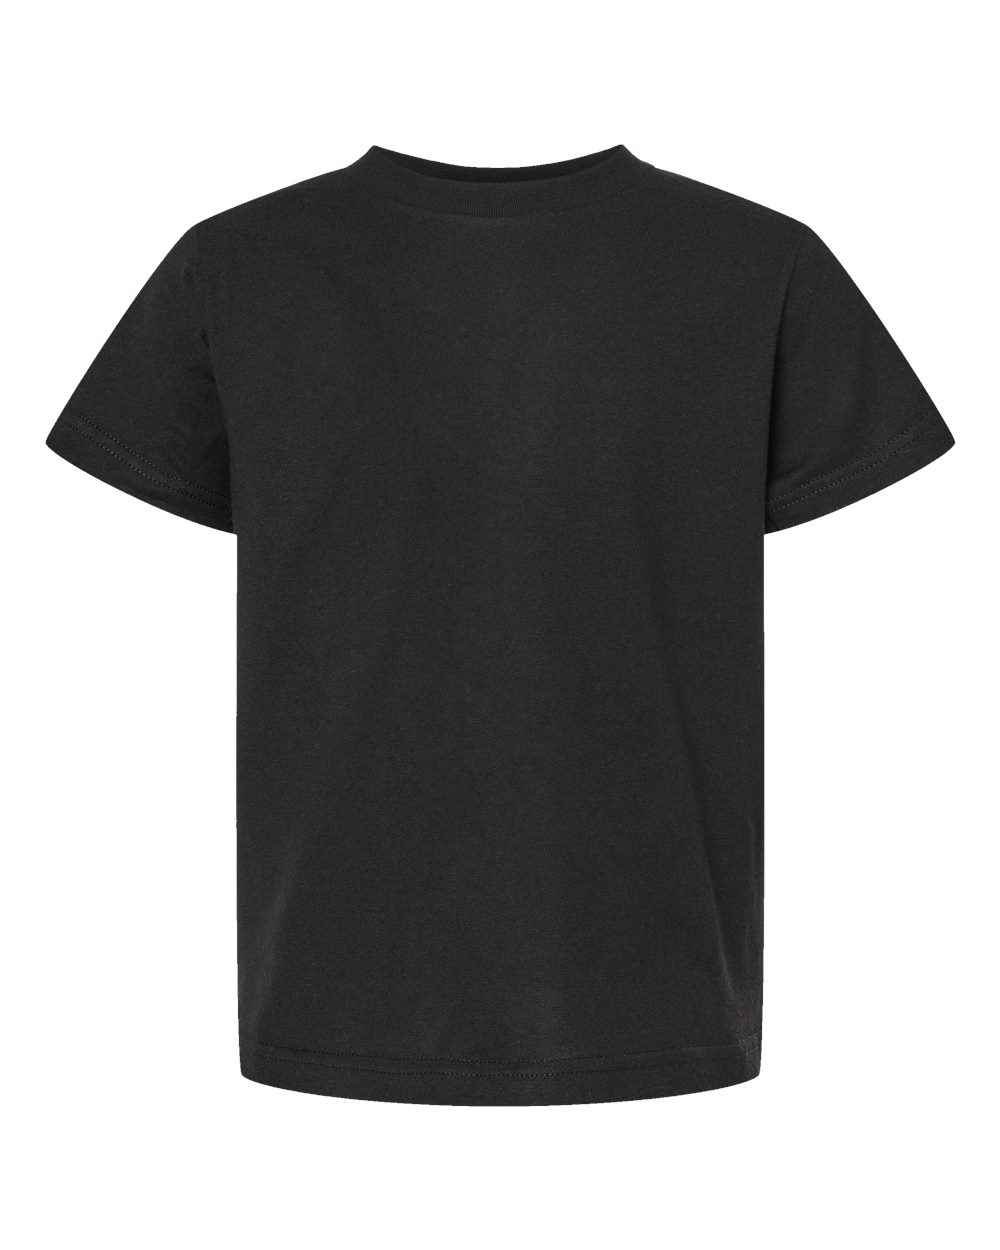 Tultex Youth Tee (235) in Black